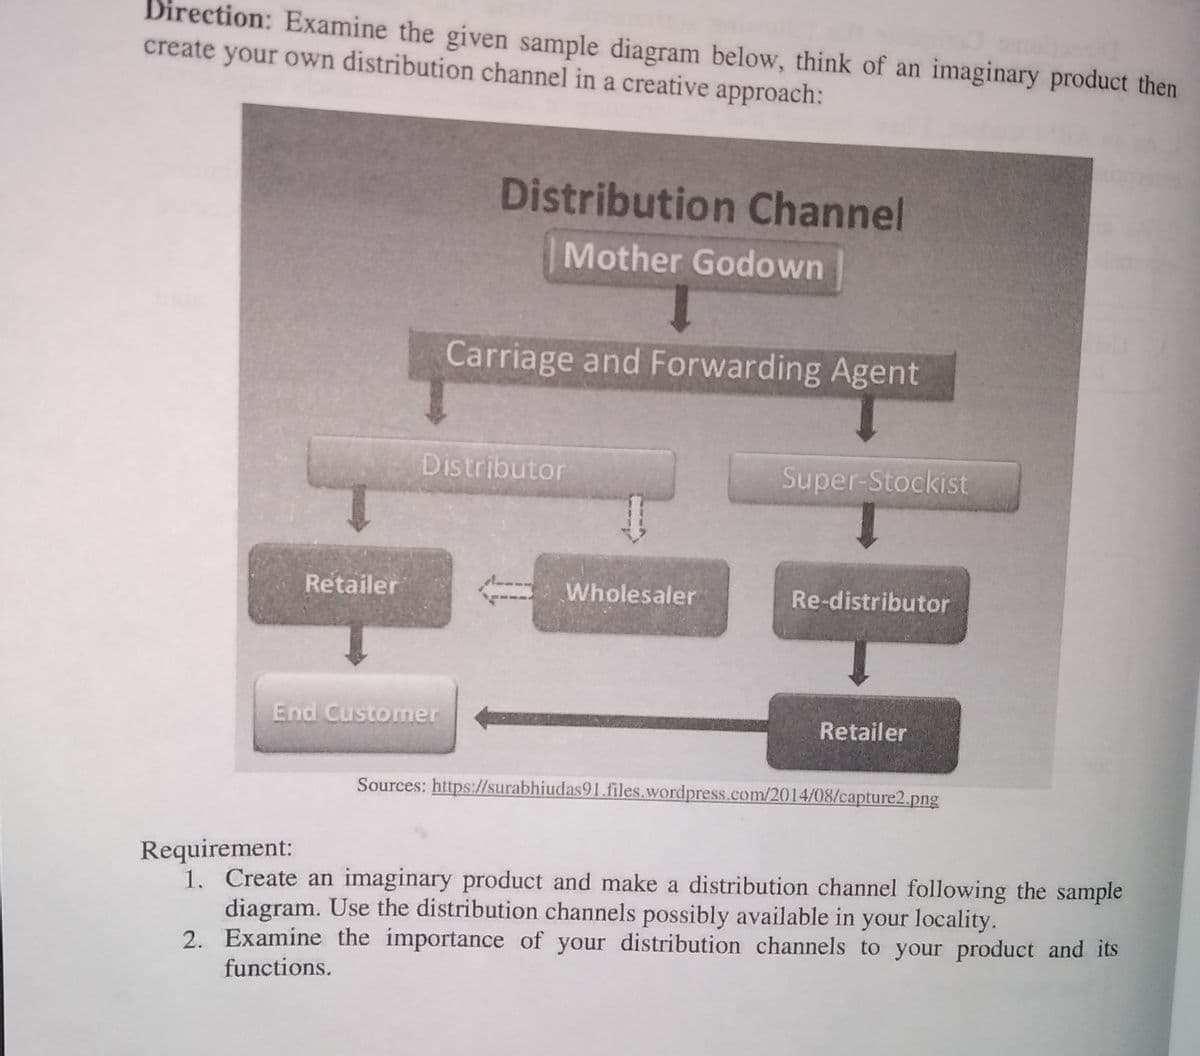 Direction: Examine the given sample diagram below, think of an imaginary product then
create your own distribution channel in a creative approach:
Distribution Channel
Mother Godown
Carriage and Forwarding Agent
Distributor
Super-Stockist
Retailer
Wholesaler
Re-distributor
End Customer
Retailer
Sources: https://surabhiudas91.files.wordpress.com/2014/08/capture2.png
Requirement:
1. Create an imaginary product and make a distribution channel following the sample
diagram. Use the distribution channels possibly available in your locality.
2. Examine the importance of your distribution channels to your product and its
functions.
